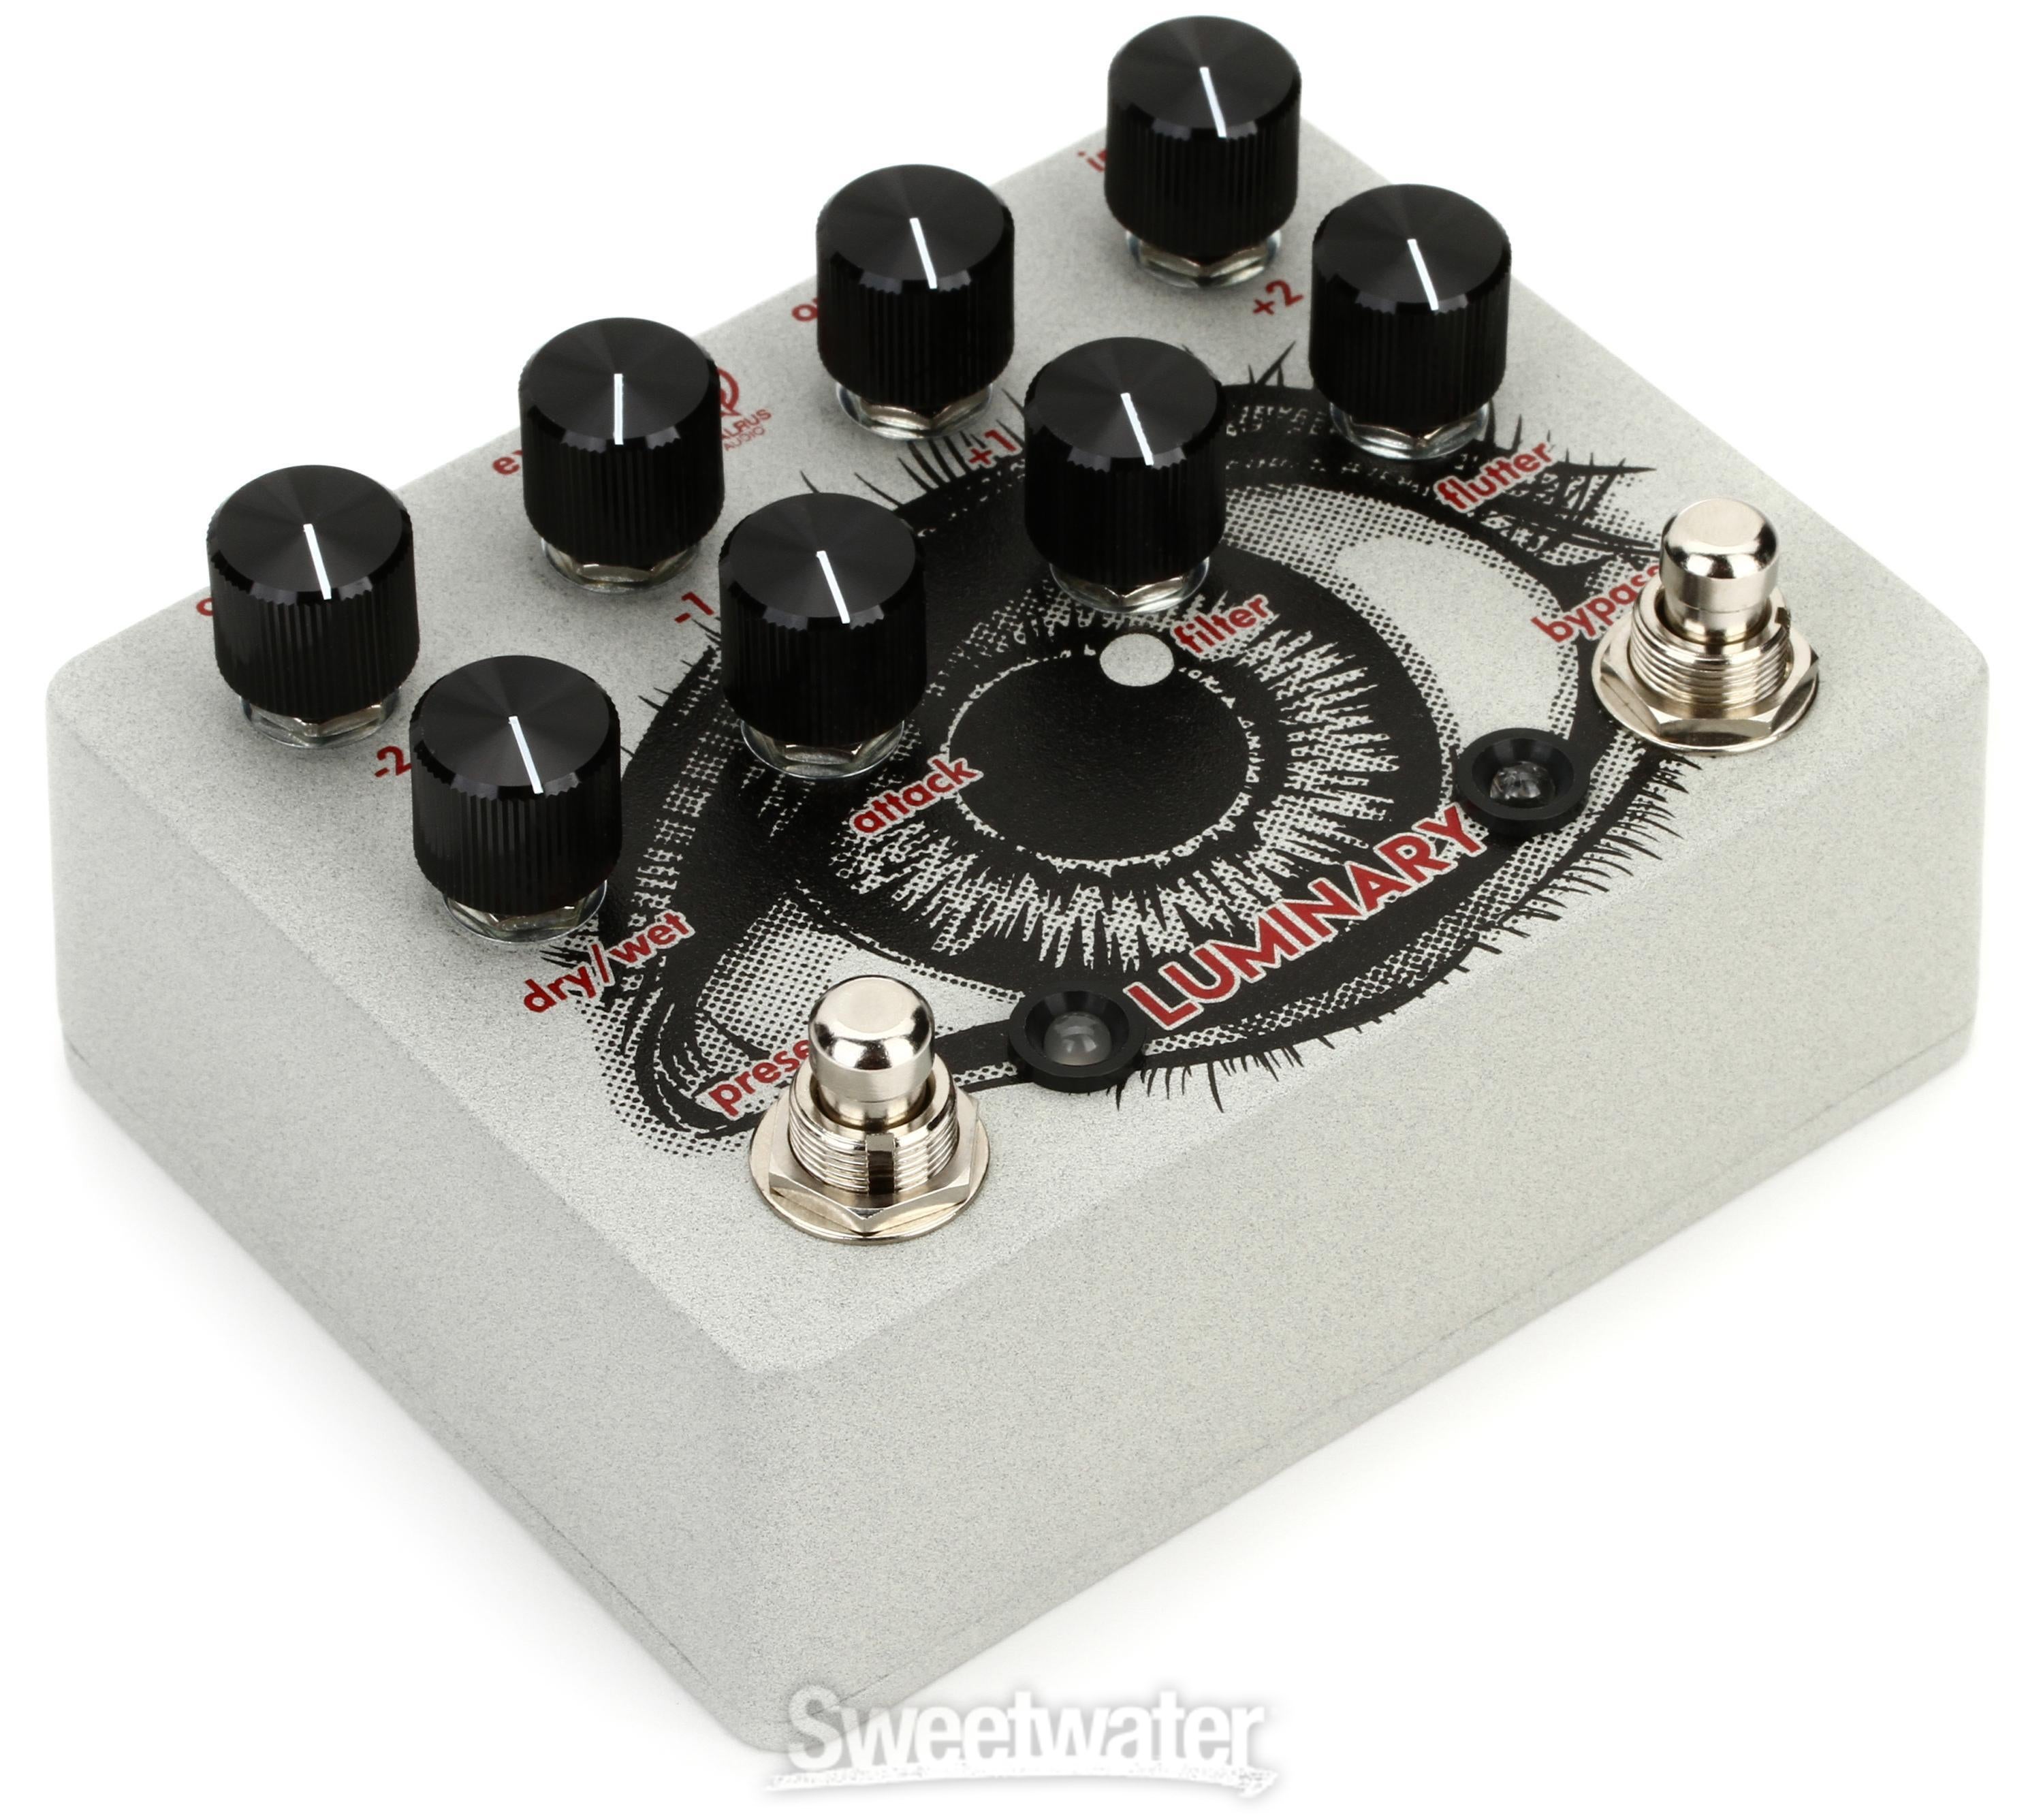 Walrus Audio Luminary V2 Quad Octave Generator Pedal | Sweetwater